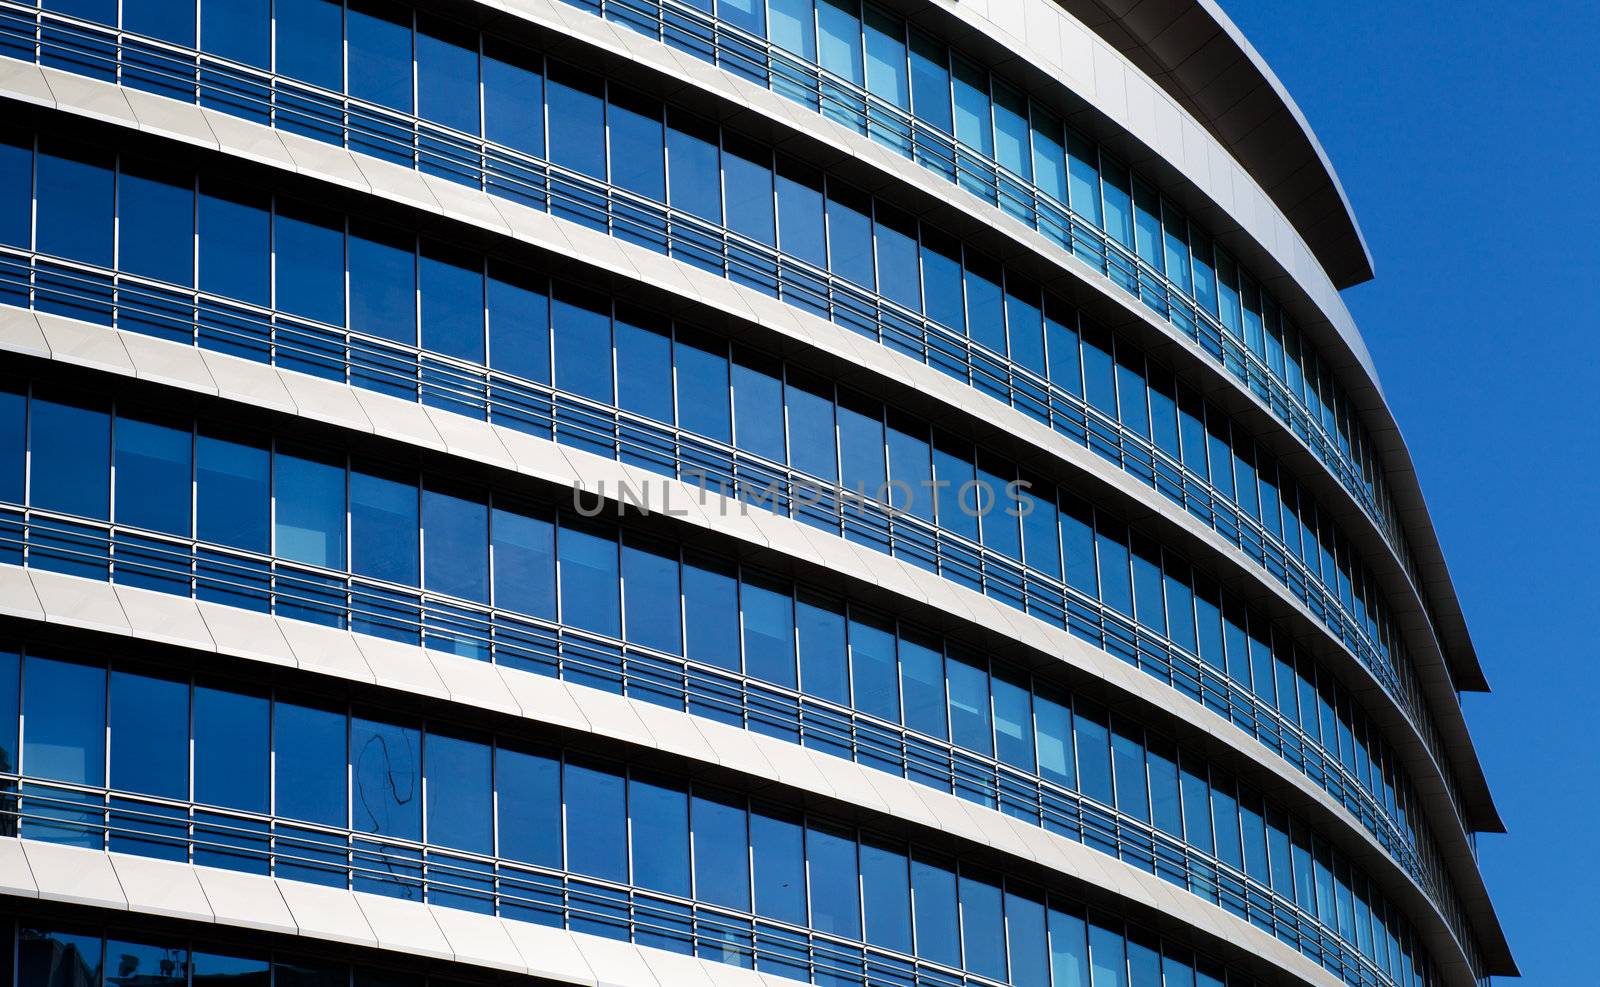 Windows of contemporary business tower over sky background